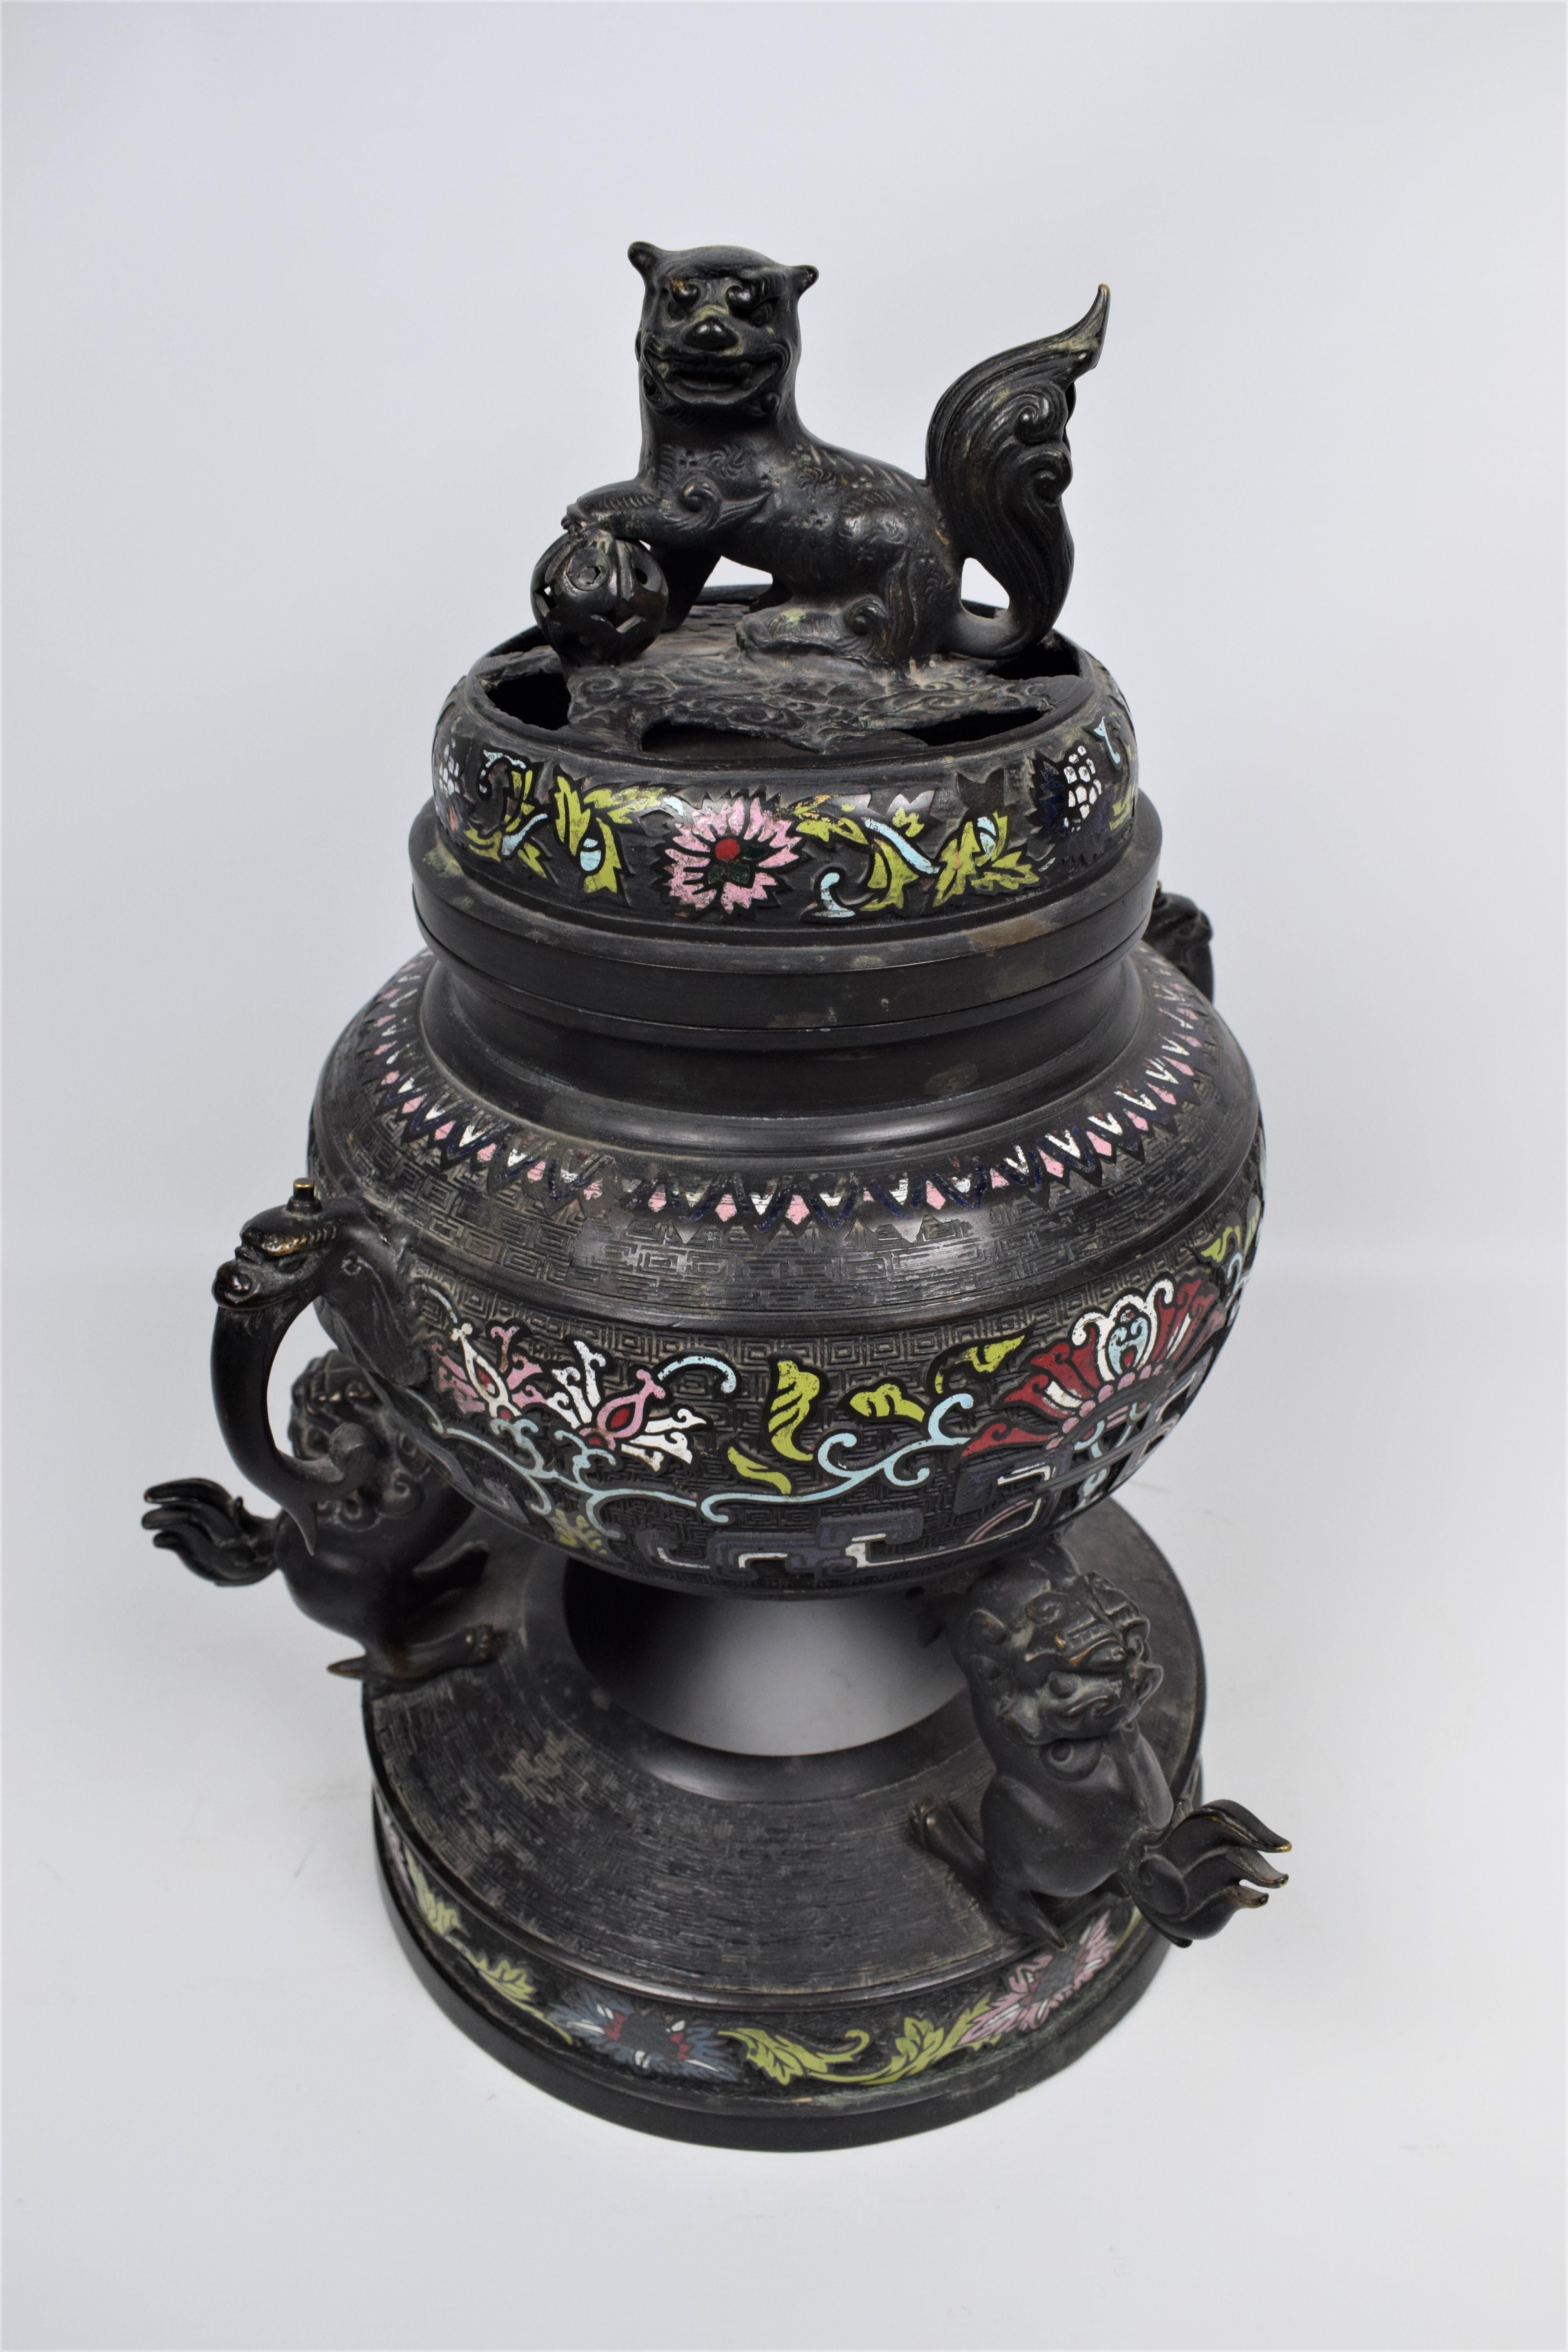 Enameled Pair Of Chinese Cloisonne Gilt Bronze Dragon Incense Burners, Late 19th Century For Sale